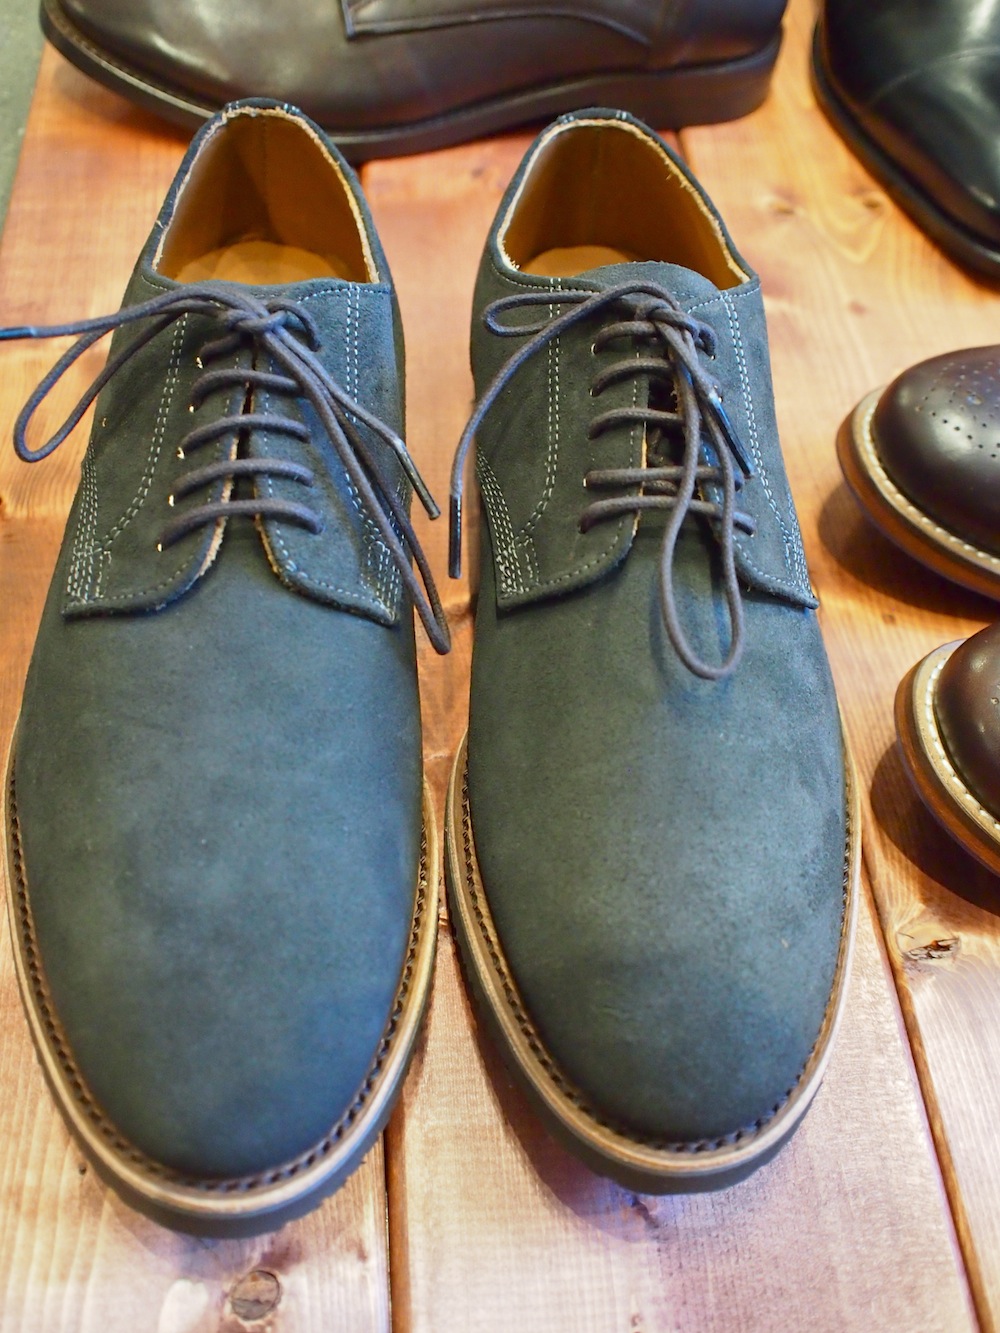 New Arrivals: Gotstyle Fall 2013 Shoes For Men | GOTSTYLE